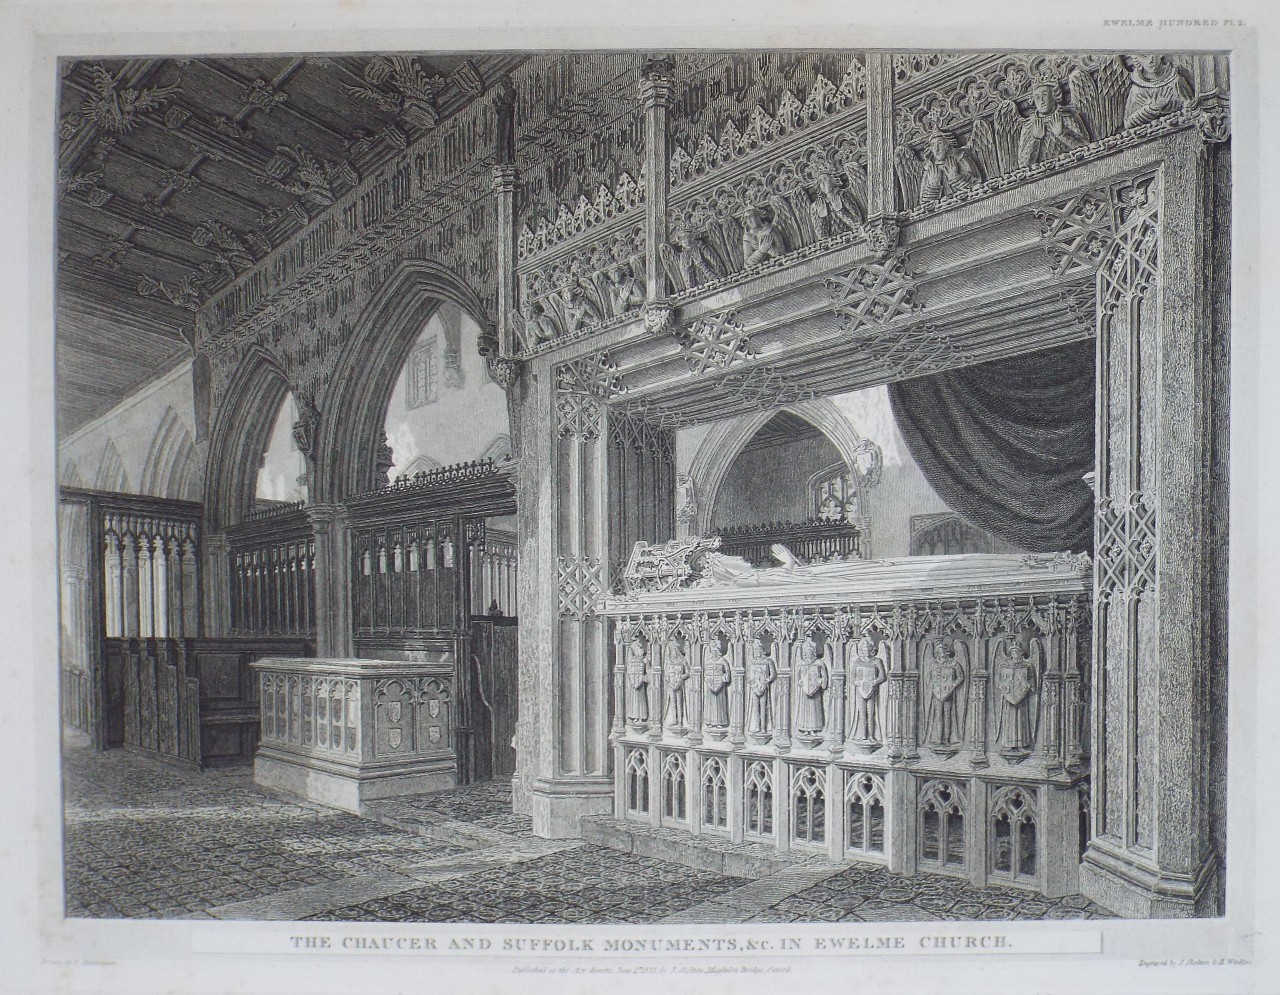 Print - The Chaucer and Suffolk Monuments, &c. in Ewelm Church. - Skelton